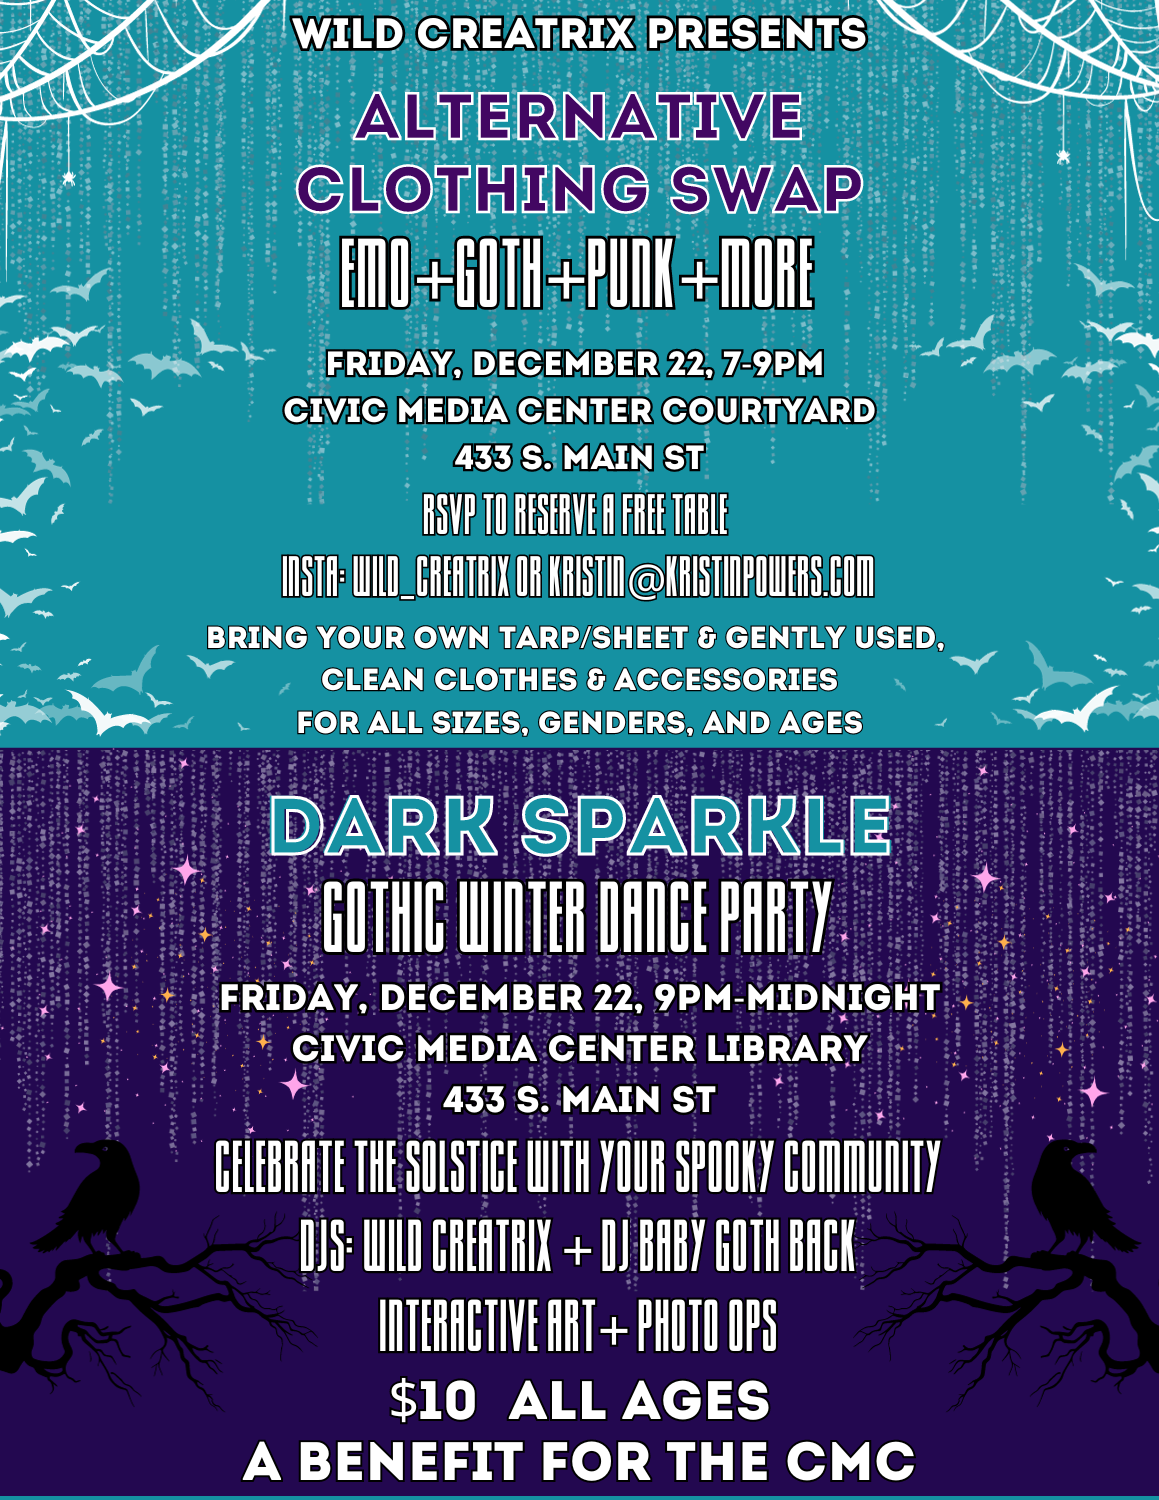 December 22nd Benefit for the civic media center